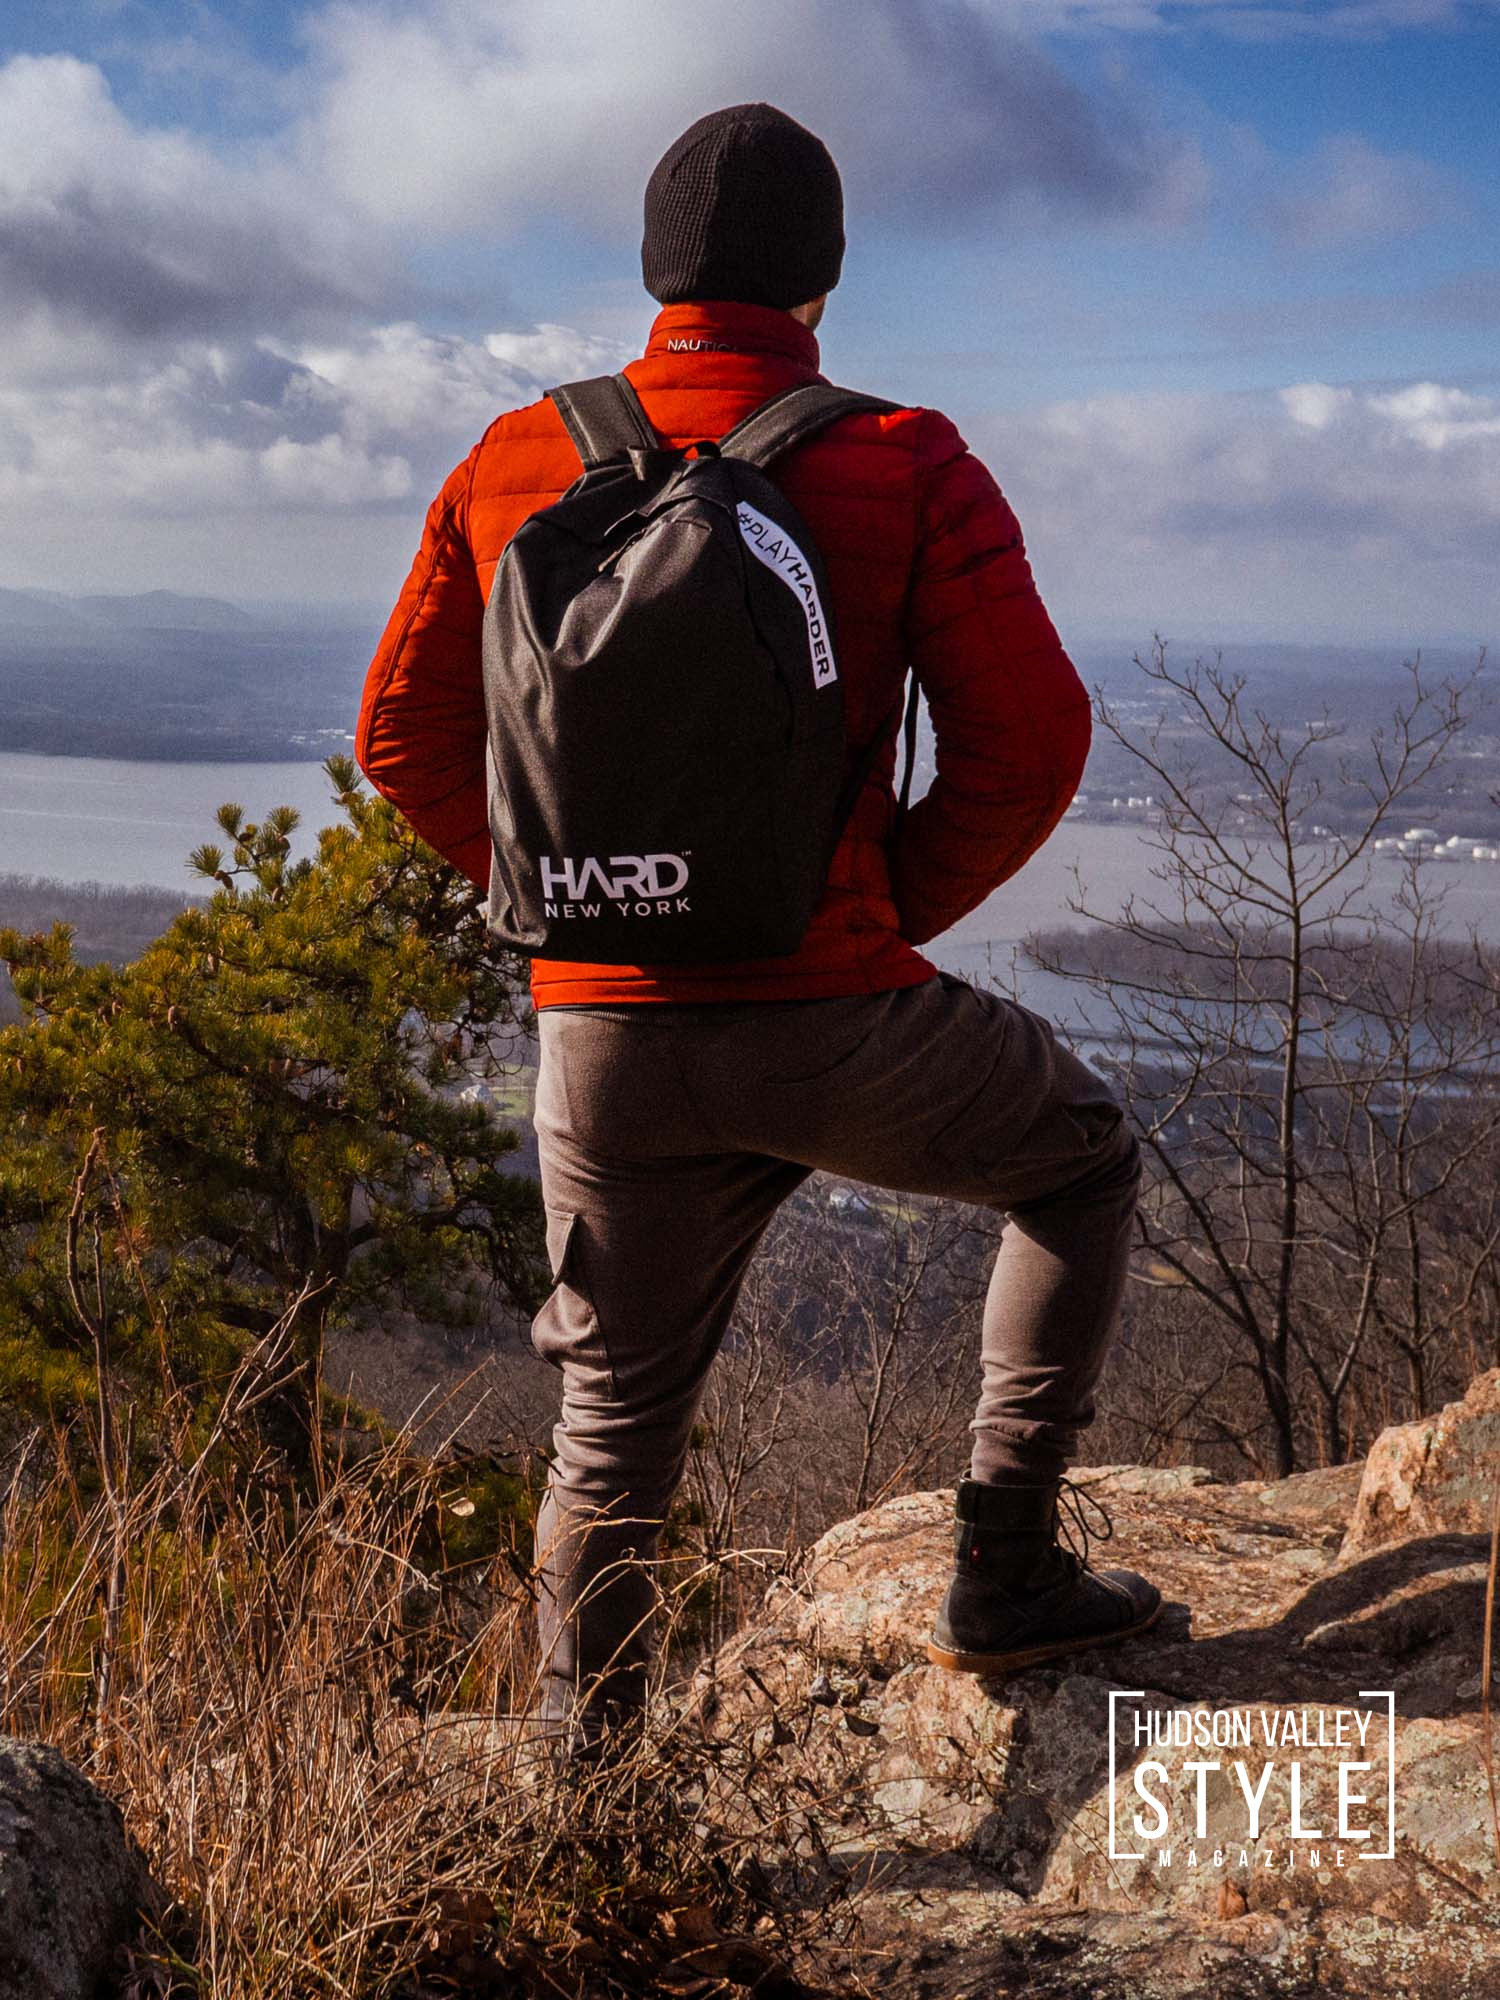 Hike & Sculpt: A Breath of Fresh Air and a Sculpted You in the Majestic Hudson Valley – Fitness and Hiking Adventures with Bodybuilding Coach Maxwell Alexander – Presented by HARD SUPPS